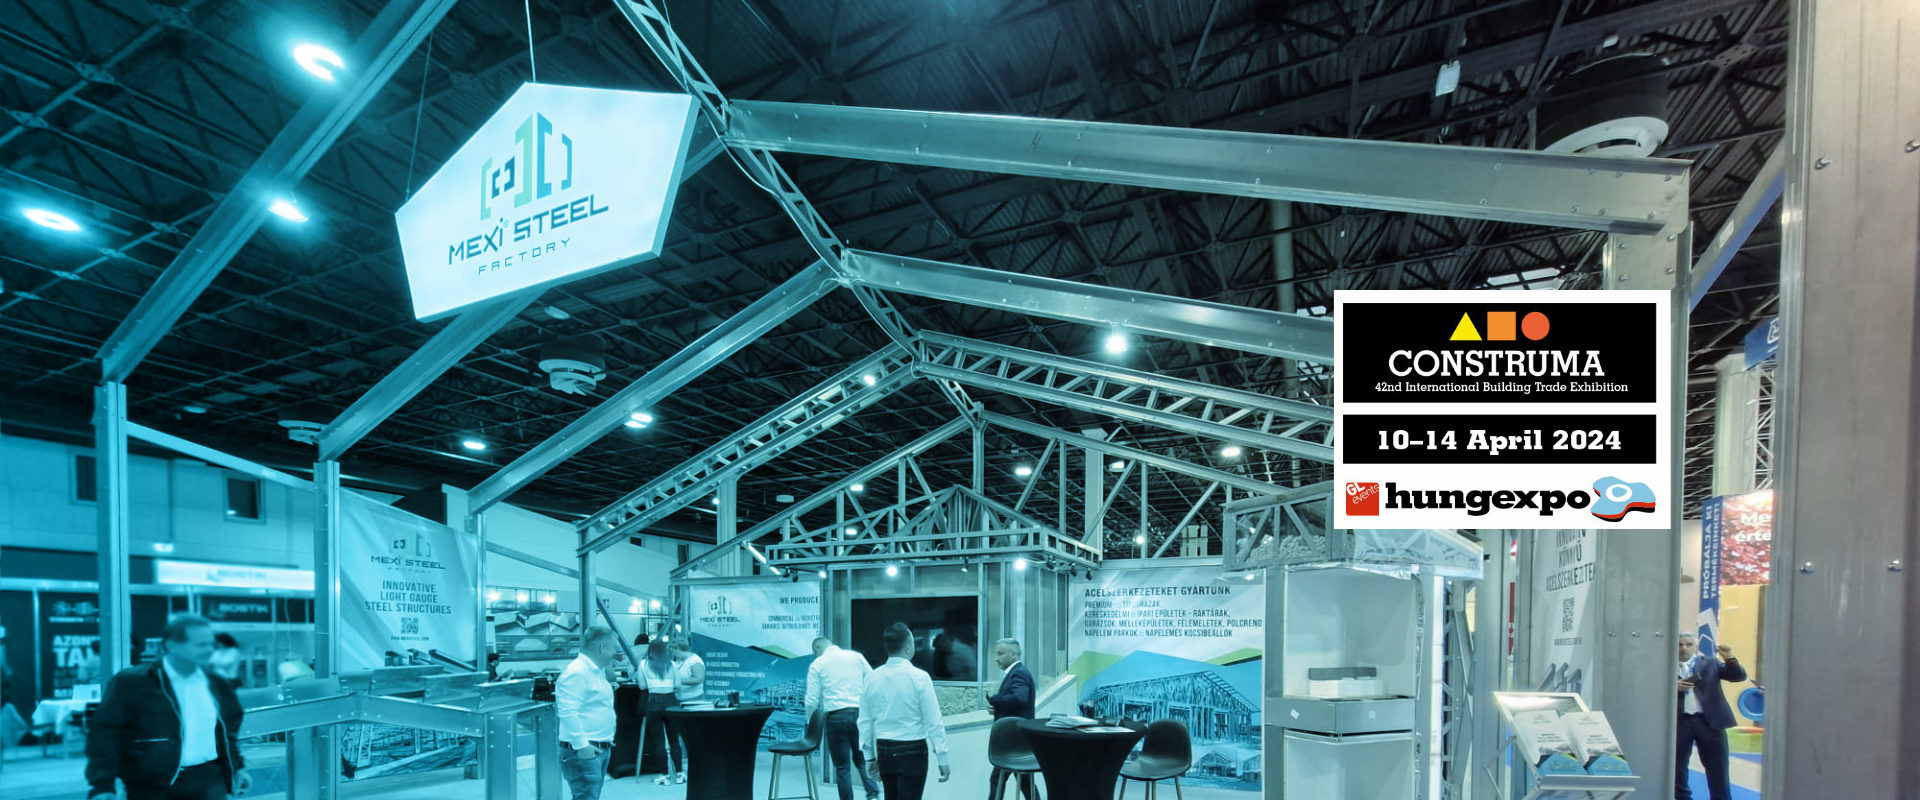 MEXI STEEL at the 42nd International Building Trade Exhibition